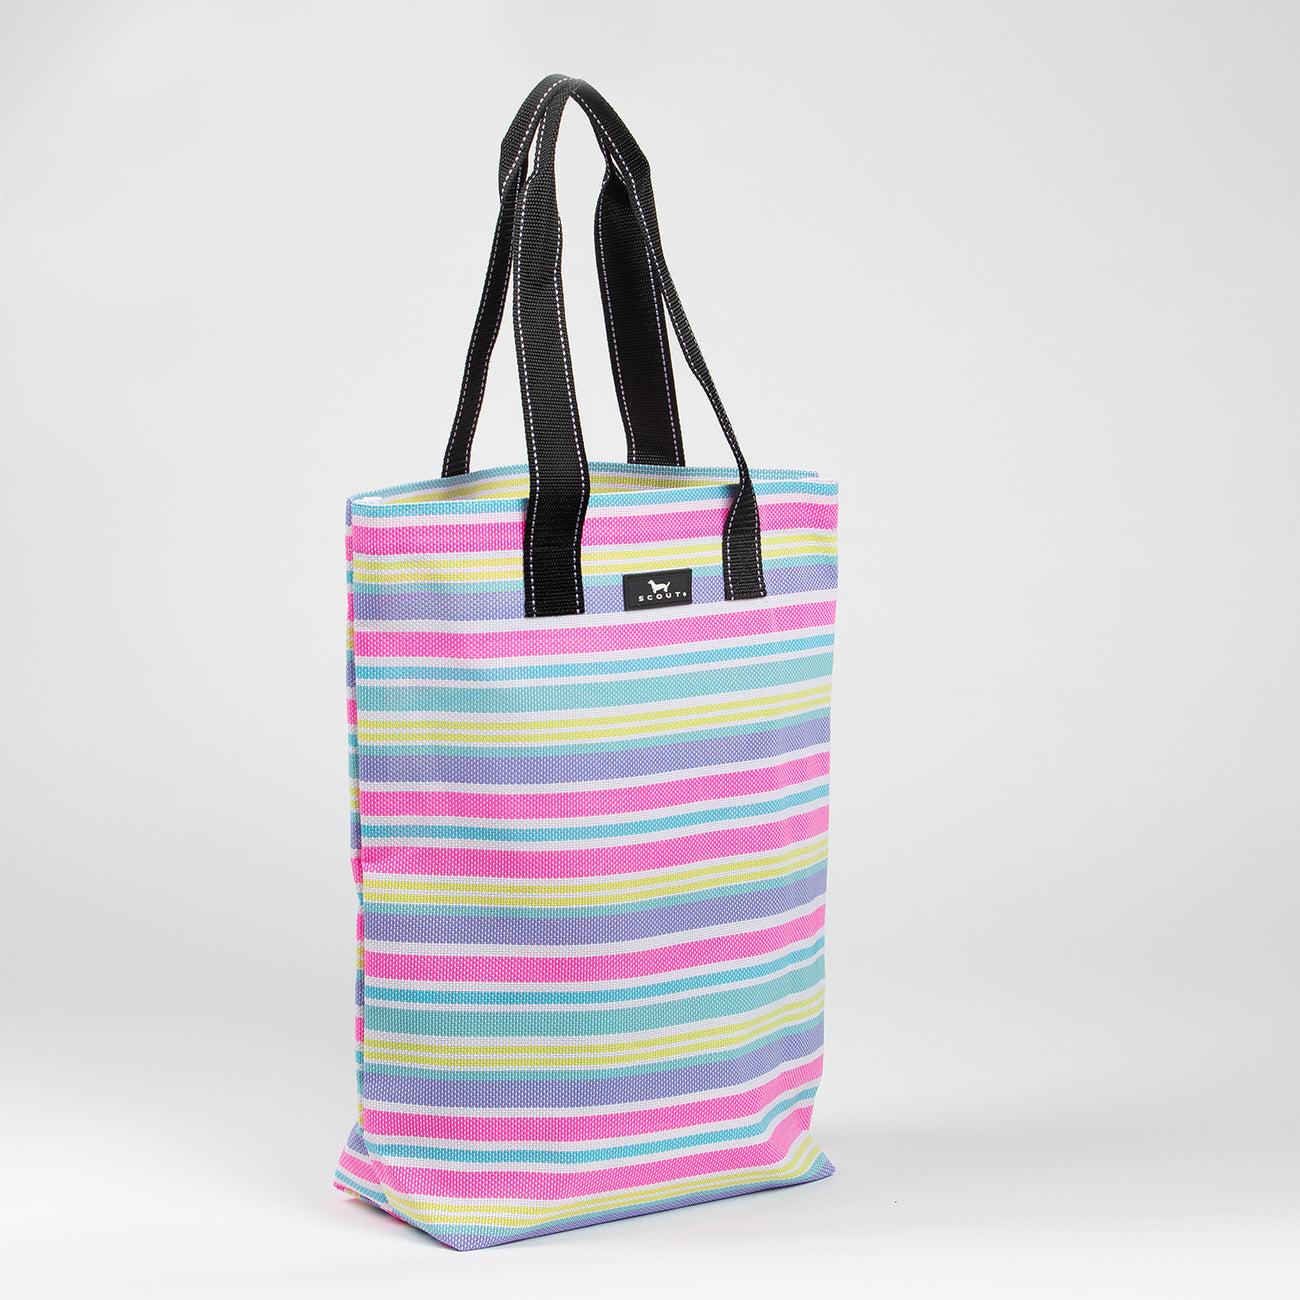 Freshly Squeezed Deep Dive Open Top Tote by Scout